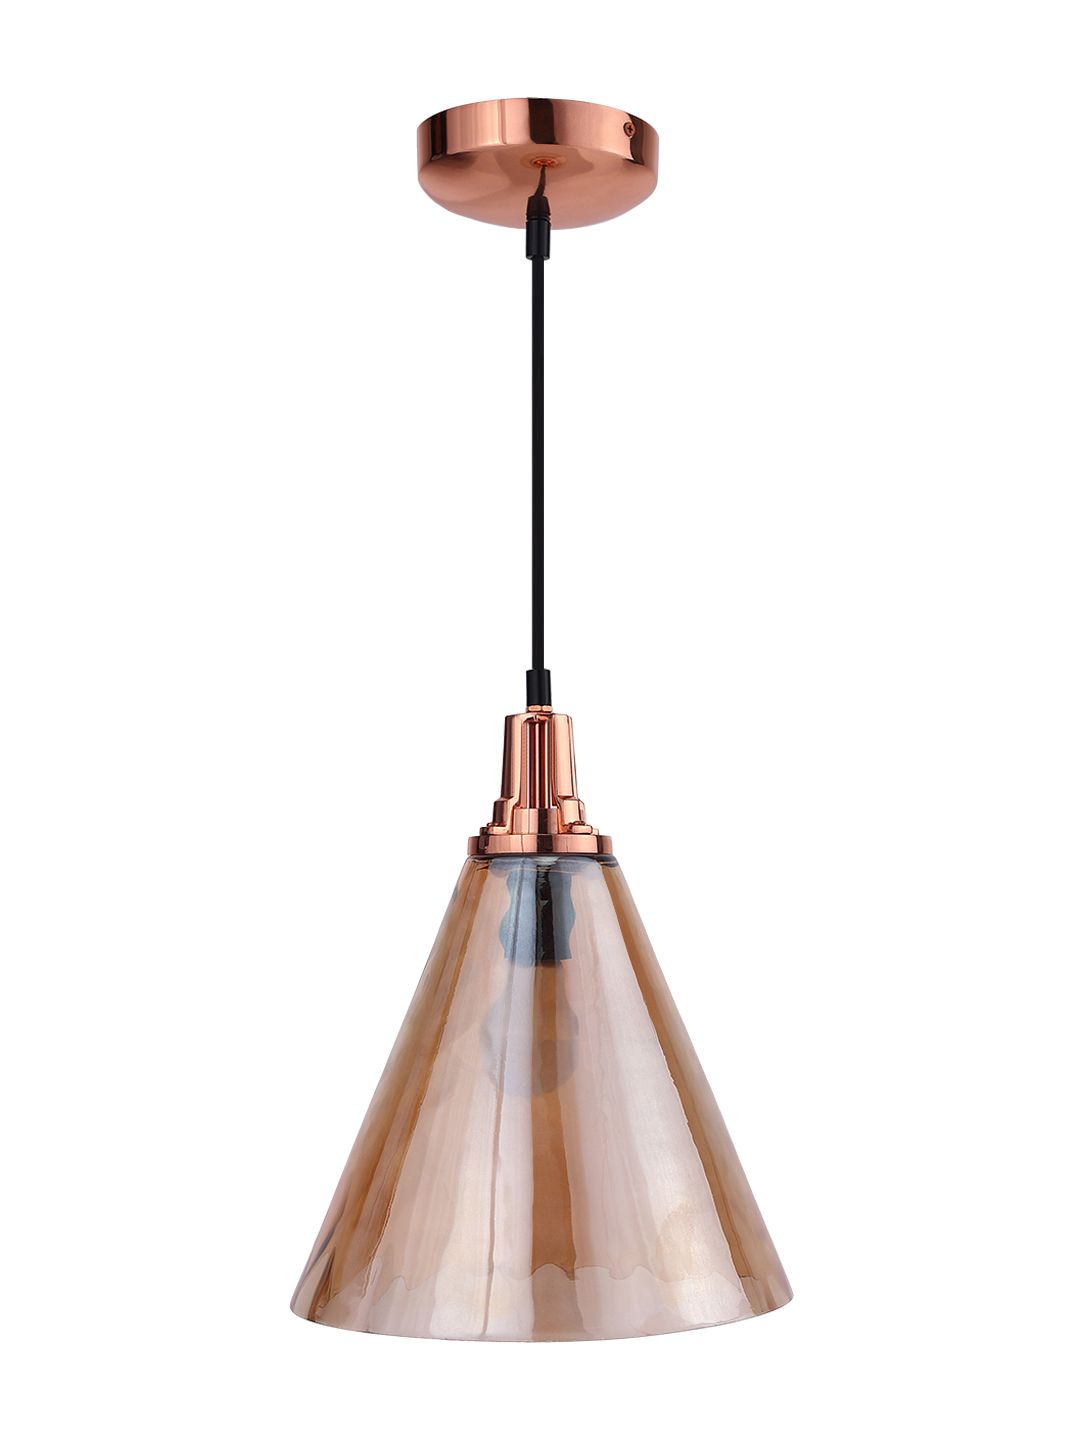 Philips Copper-Toned Tawny Pendent Ceiling Light Lamp Price in India